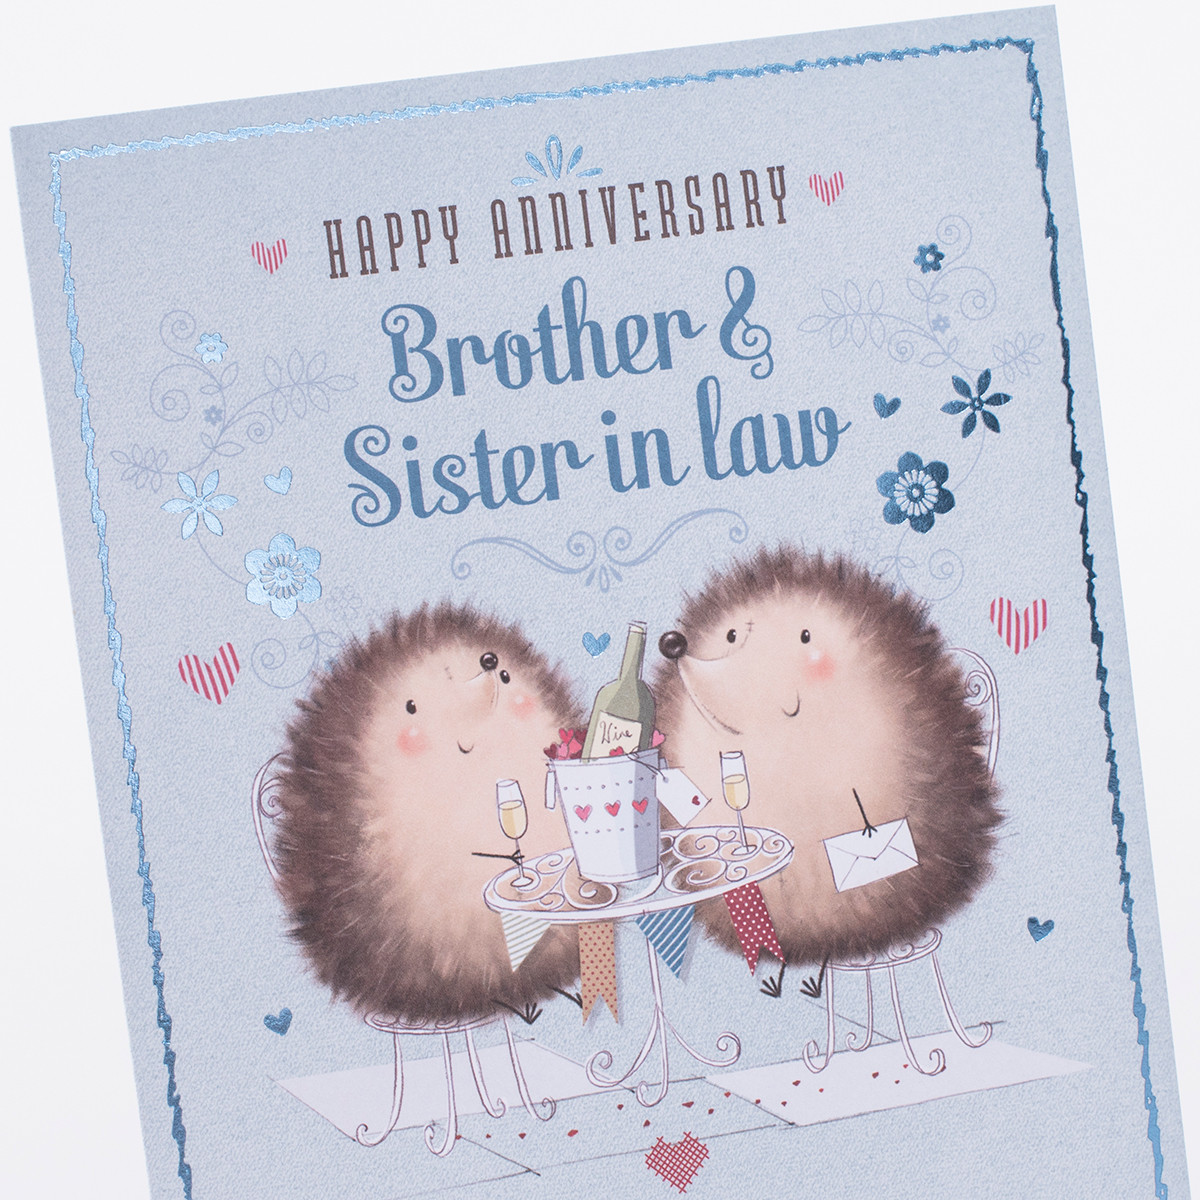 The Best Ideas for Anniversary Gift Ideas for Sister and Brother In Law